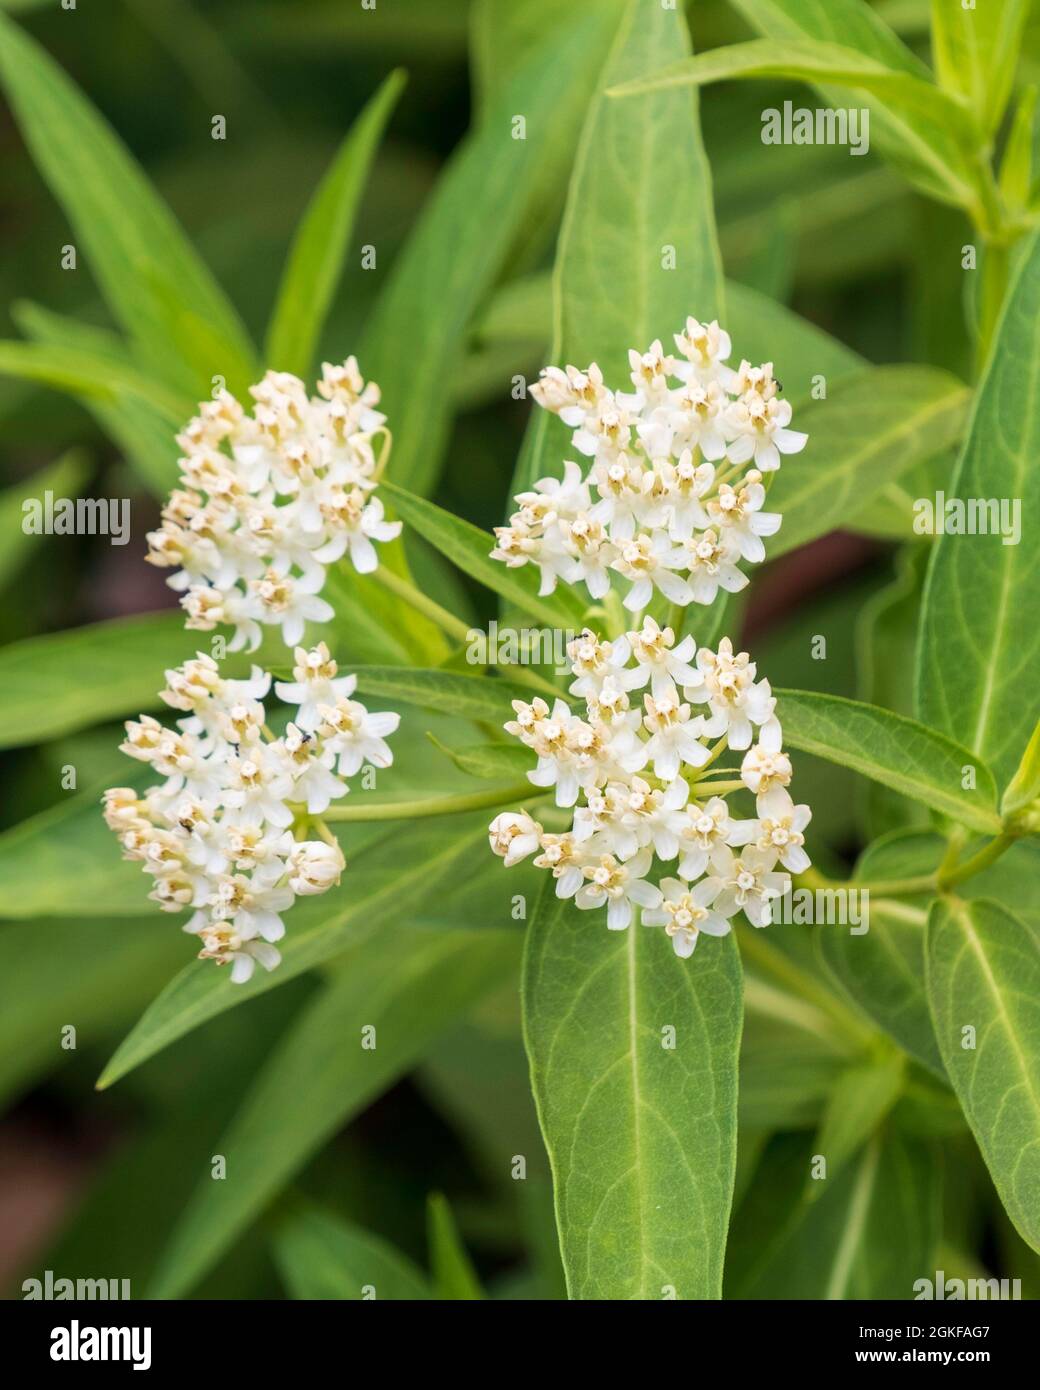 Asclepias incarnata, milkweed or butterfly weed, 'Ice Ballet', a white flowering perennial plant that hosts Monarch butterflies. Kansas, USA. Stock Photo